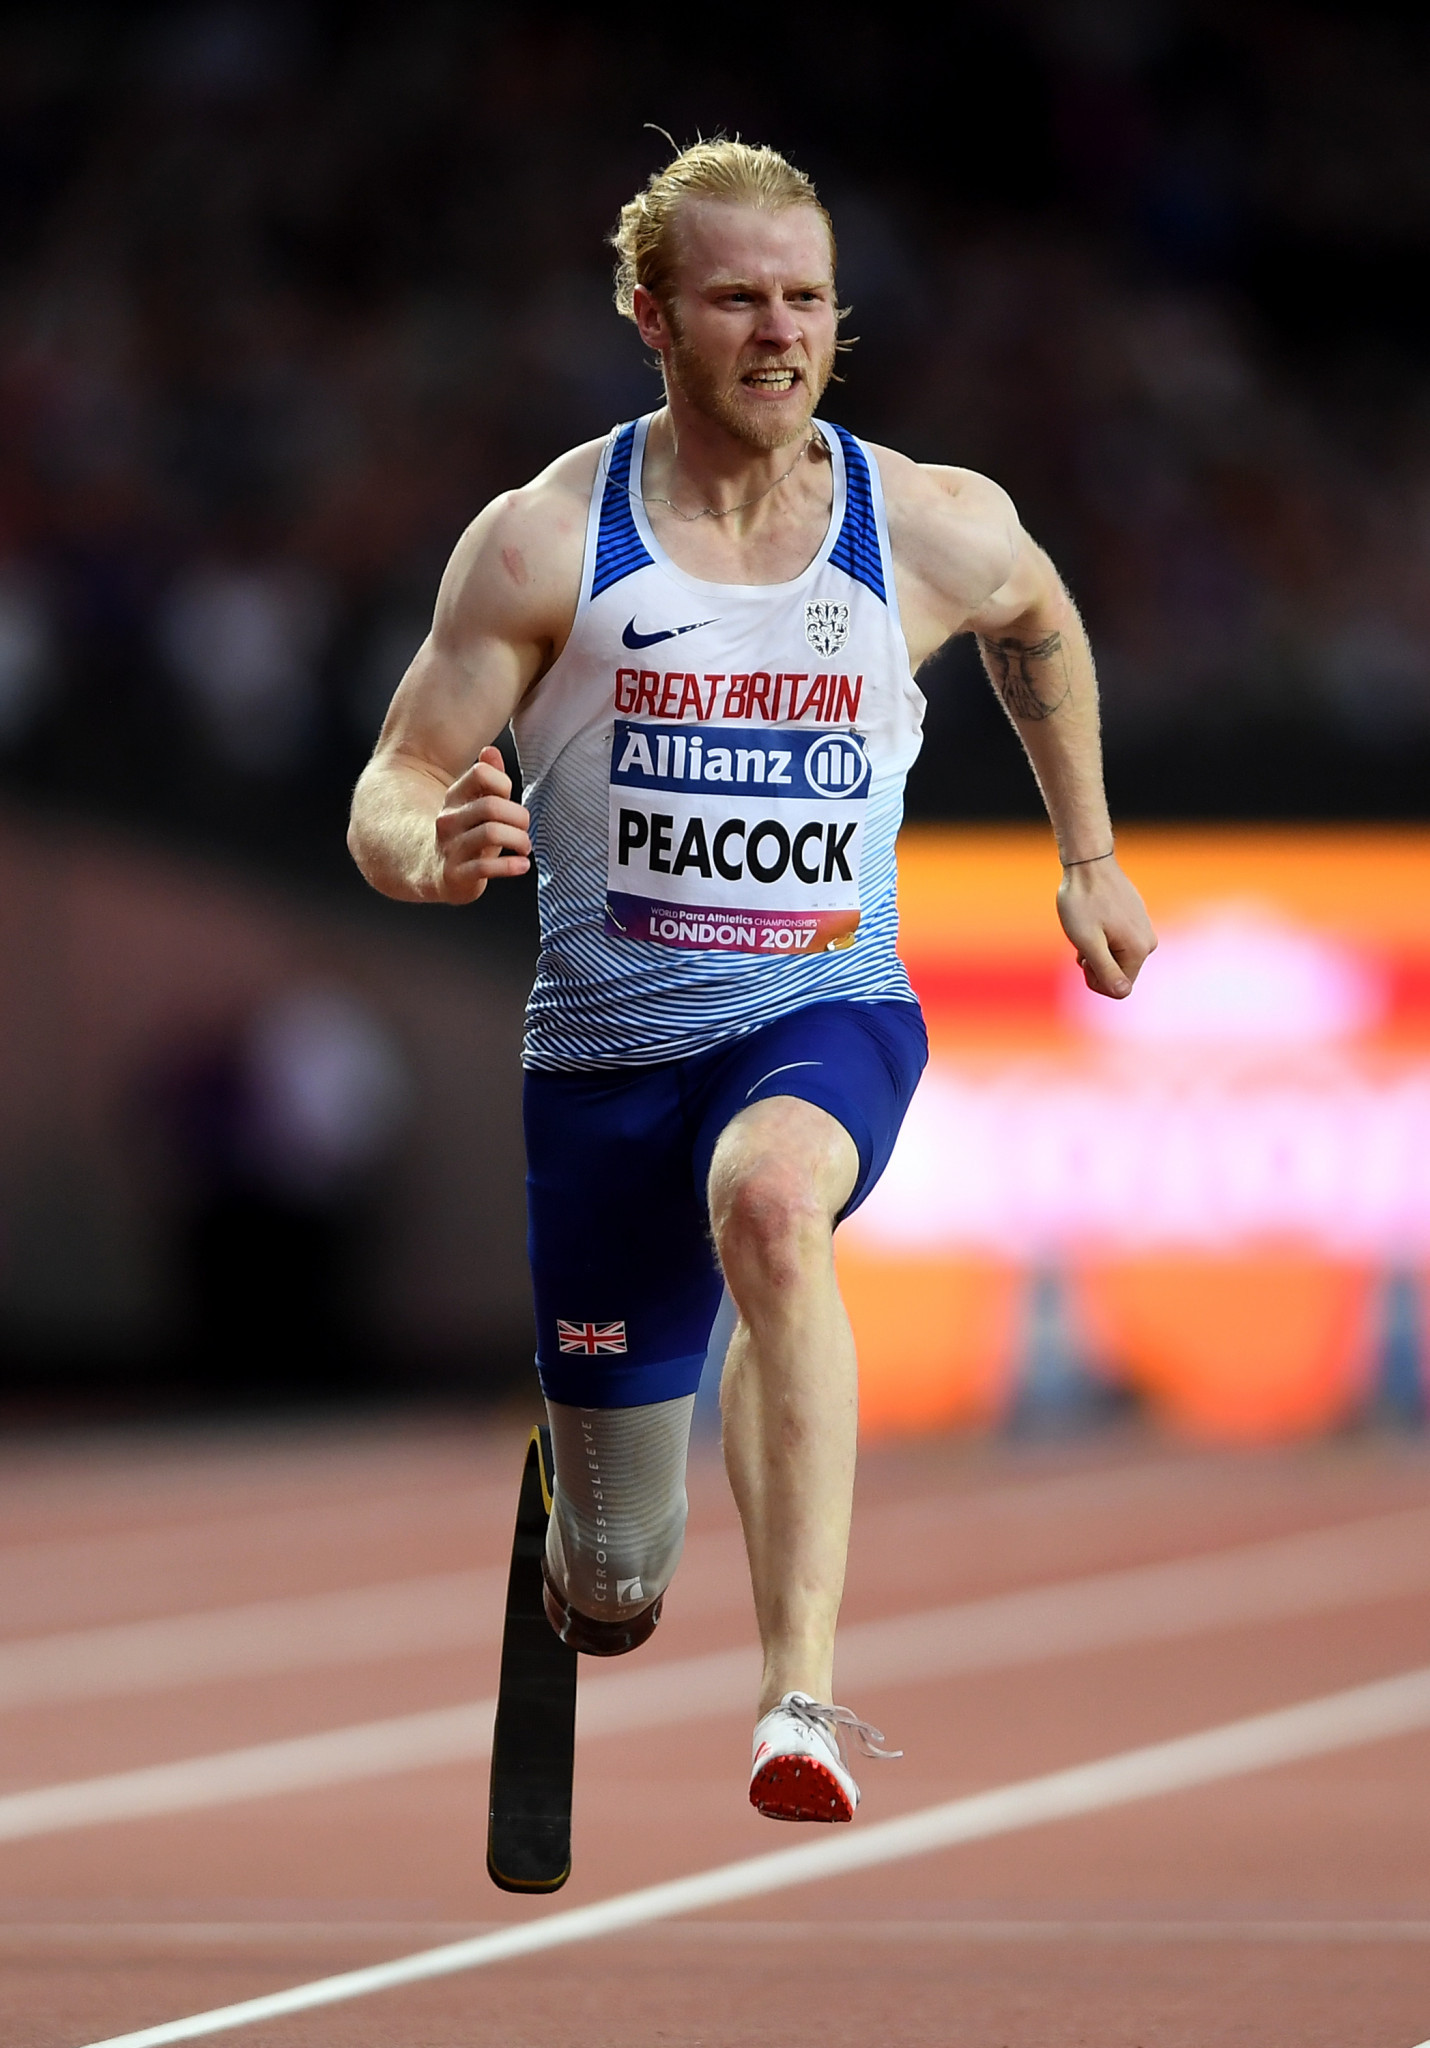 Athletes like sprinter Jonnie Peacock have led public perception in making ParalympicsGB the 